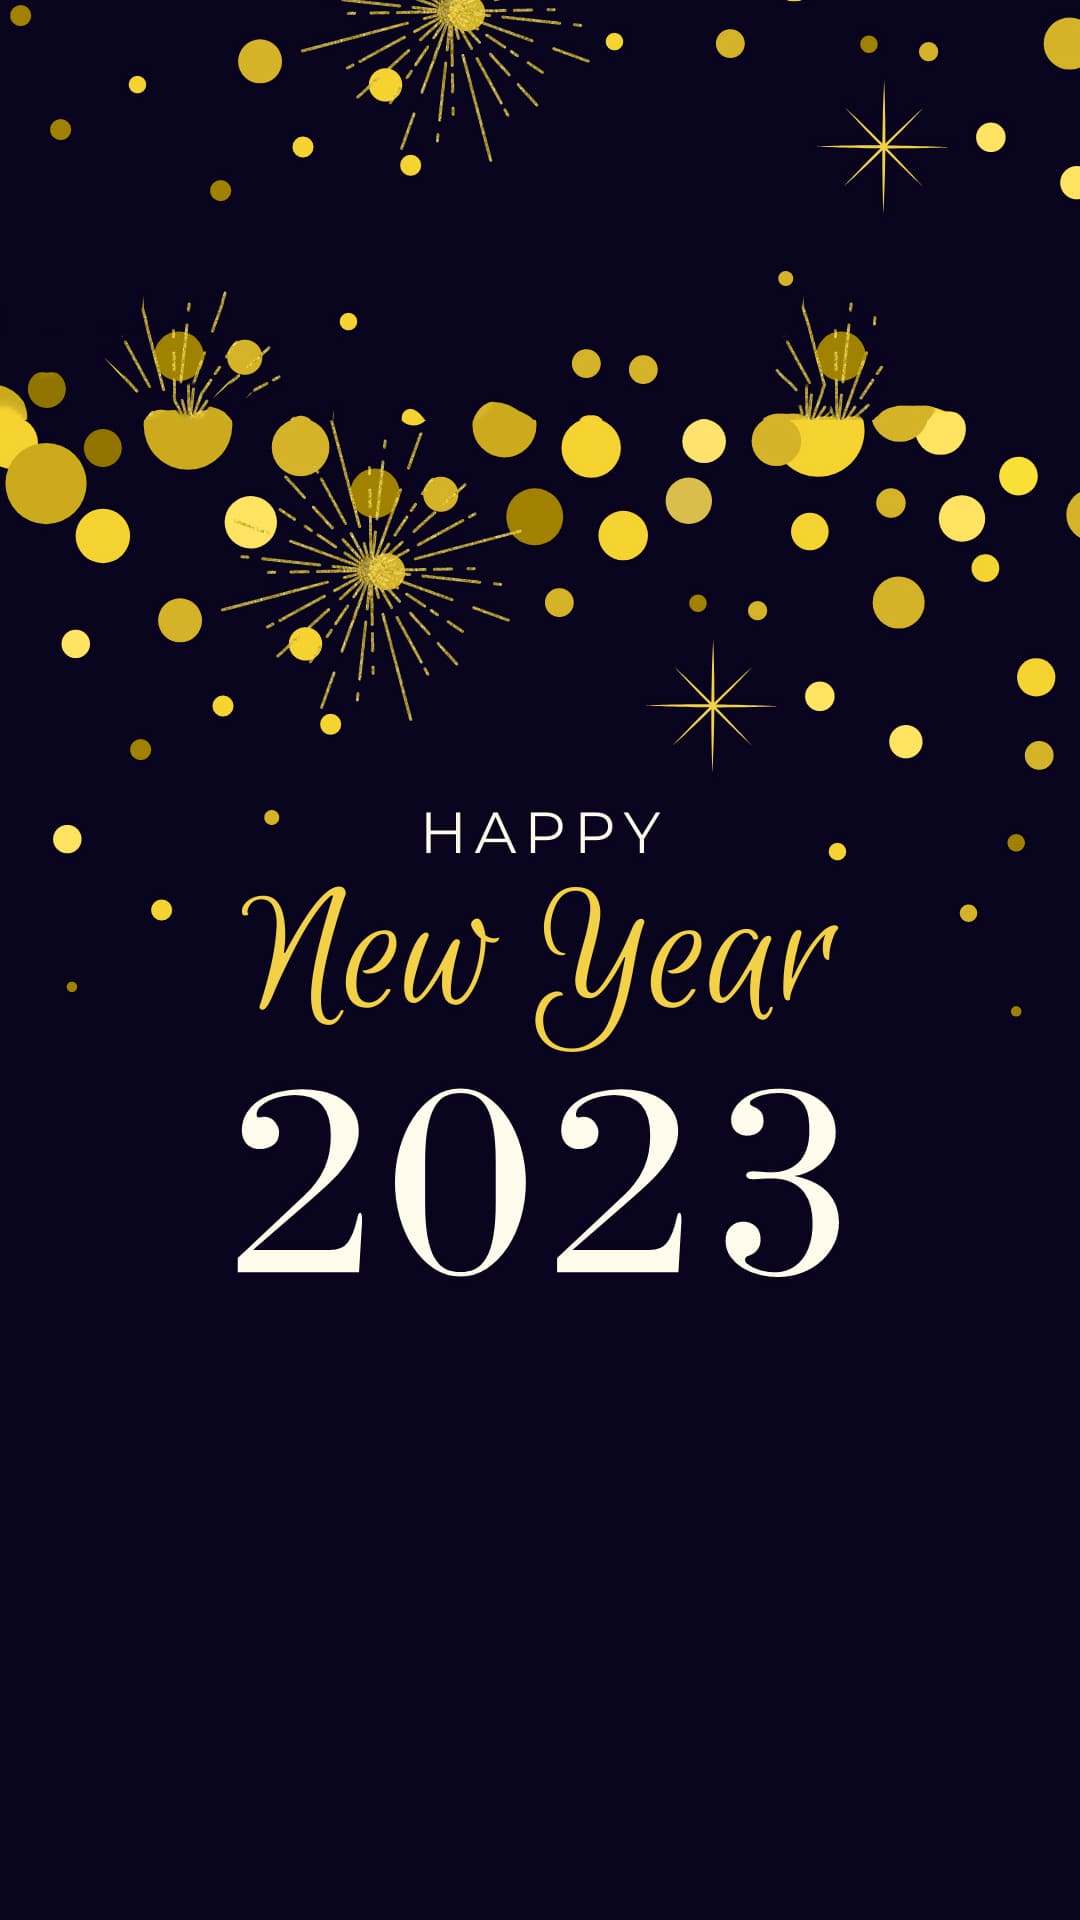 900 New Year Background Images Download HD Backgrounds on Unsplash